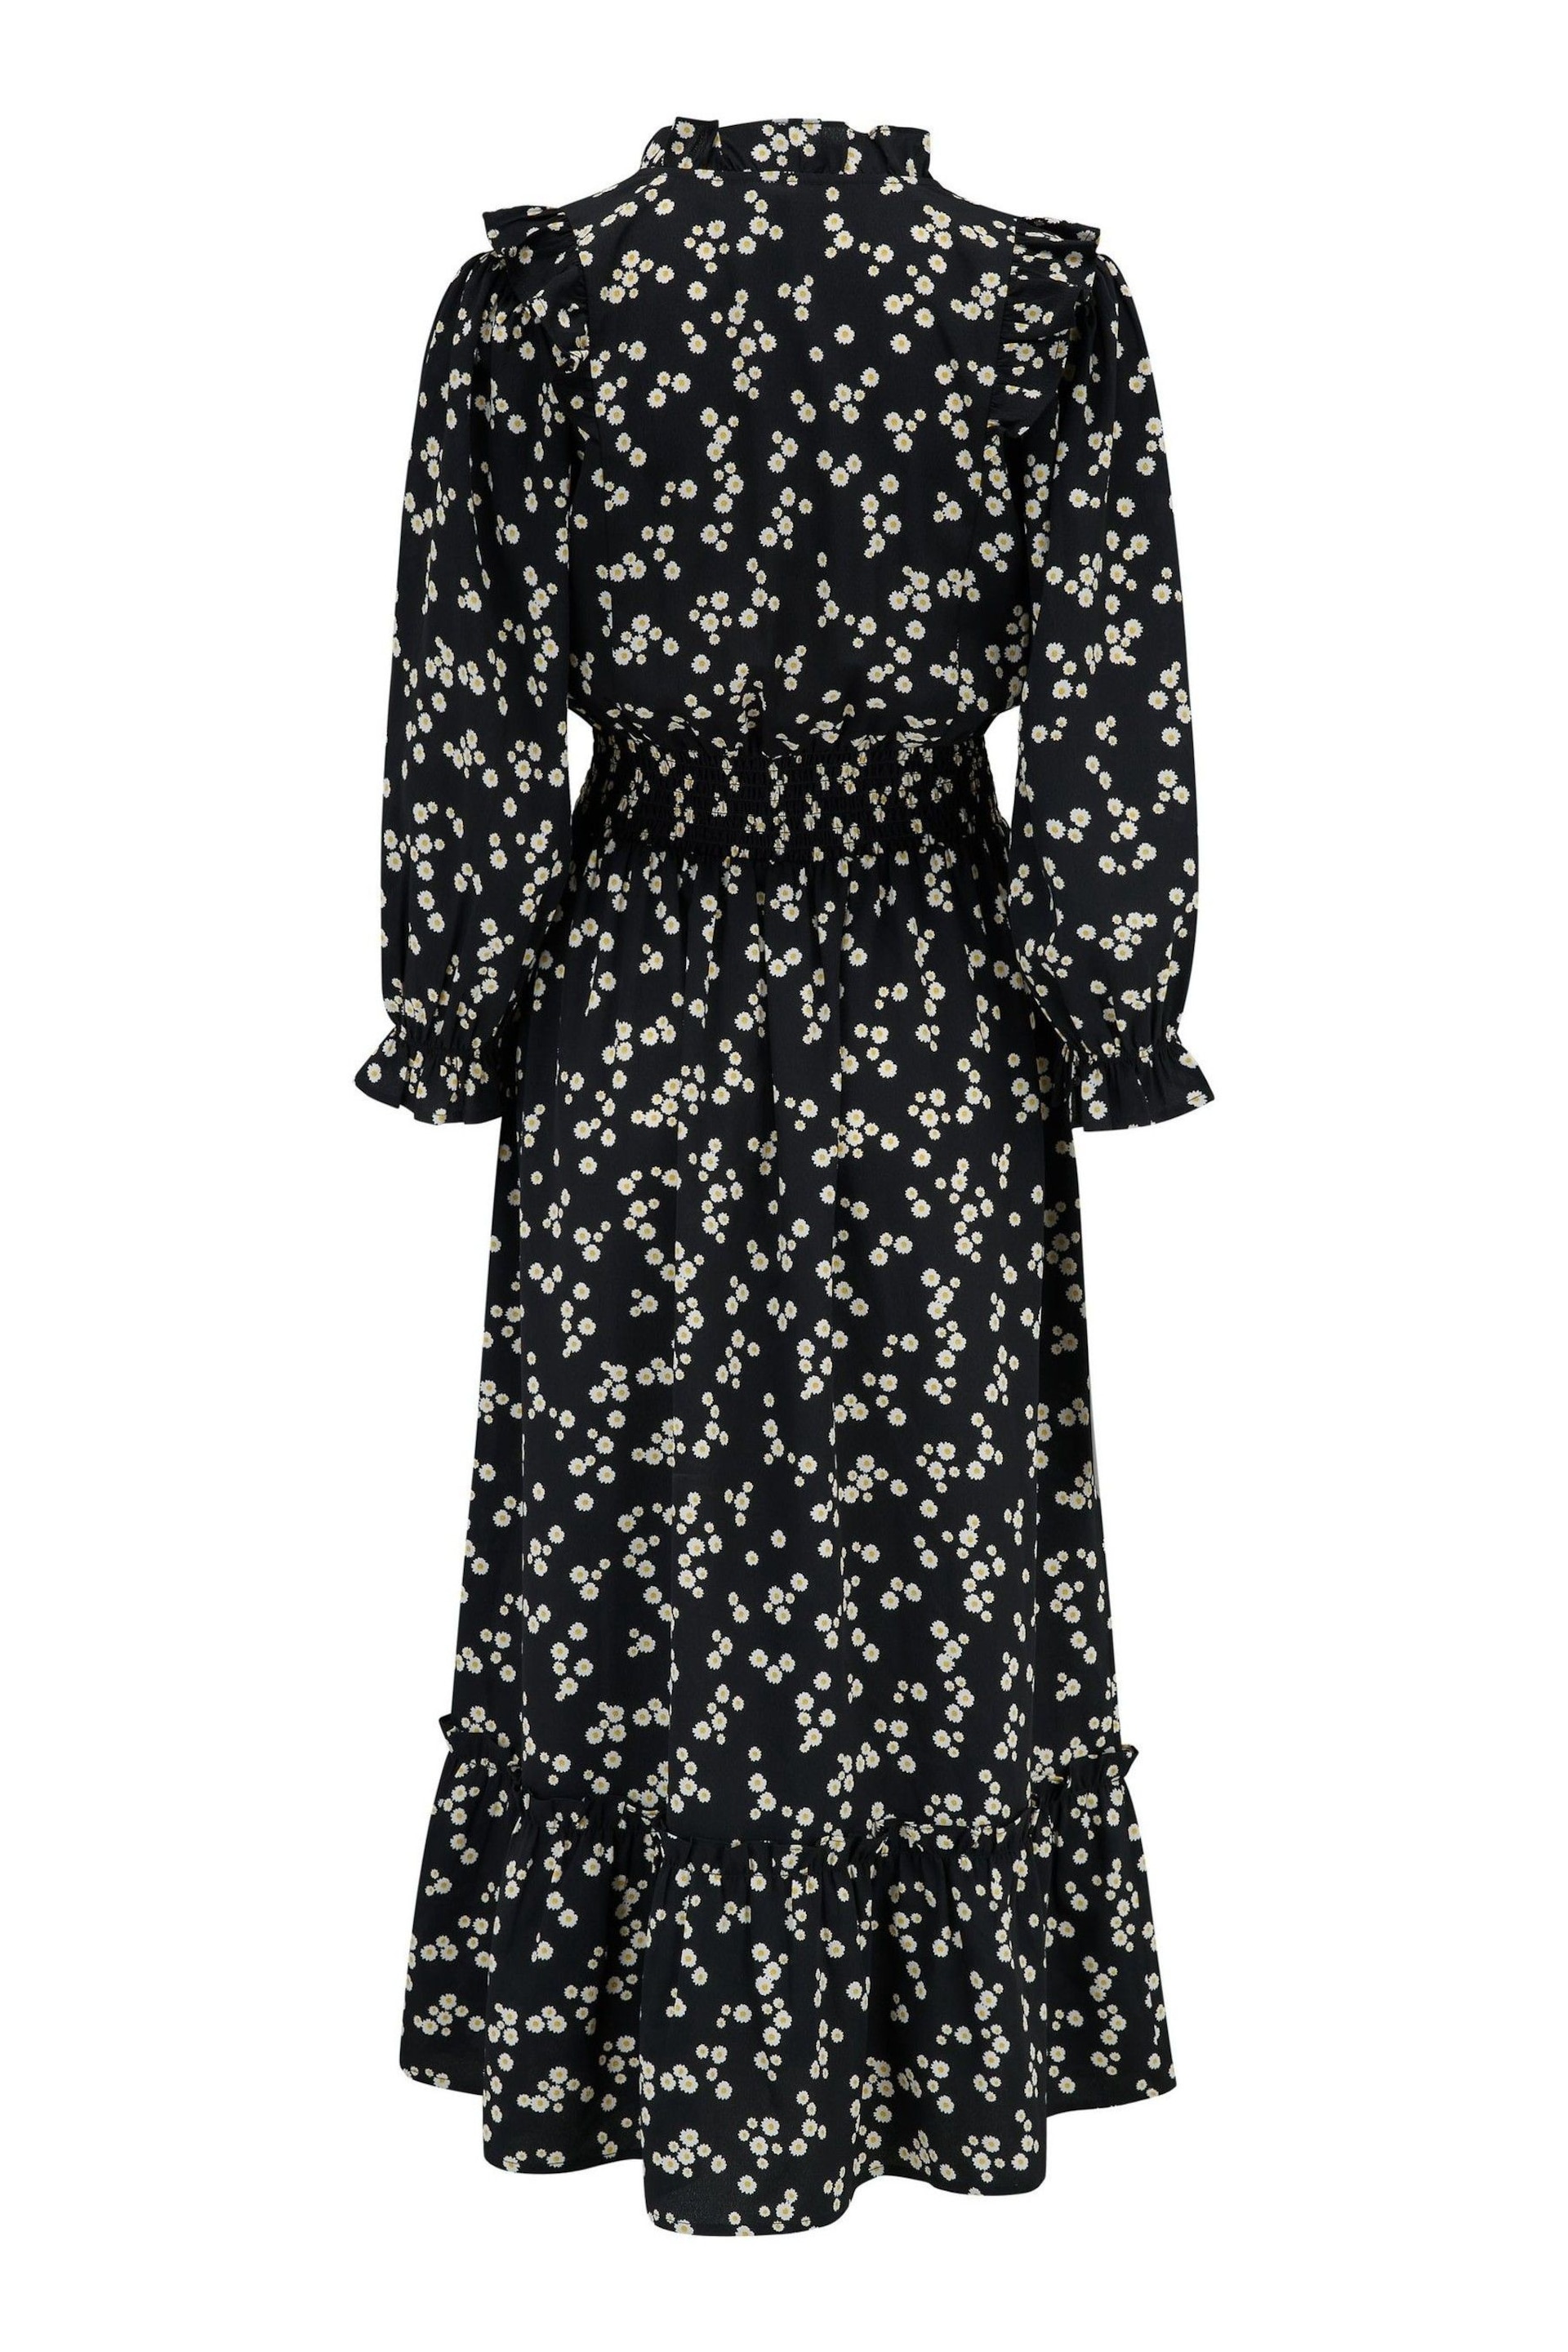 Pour Moi Black Daisy Print Maggie Recycled Dress - Image 4 of 4